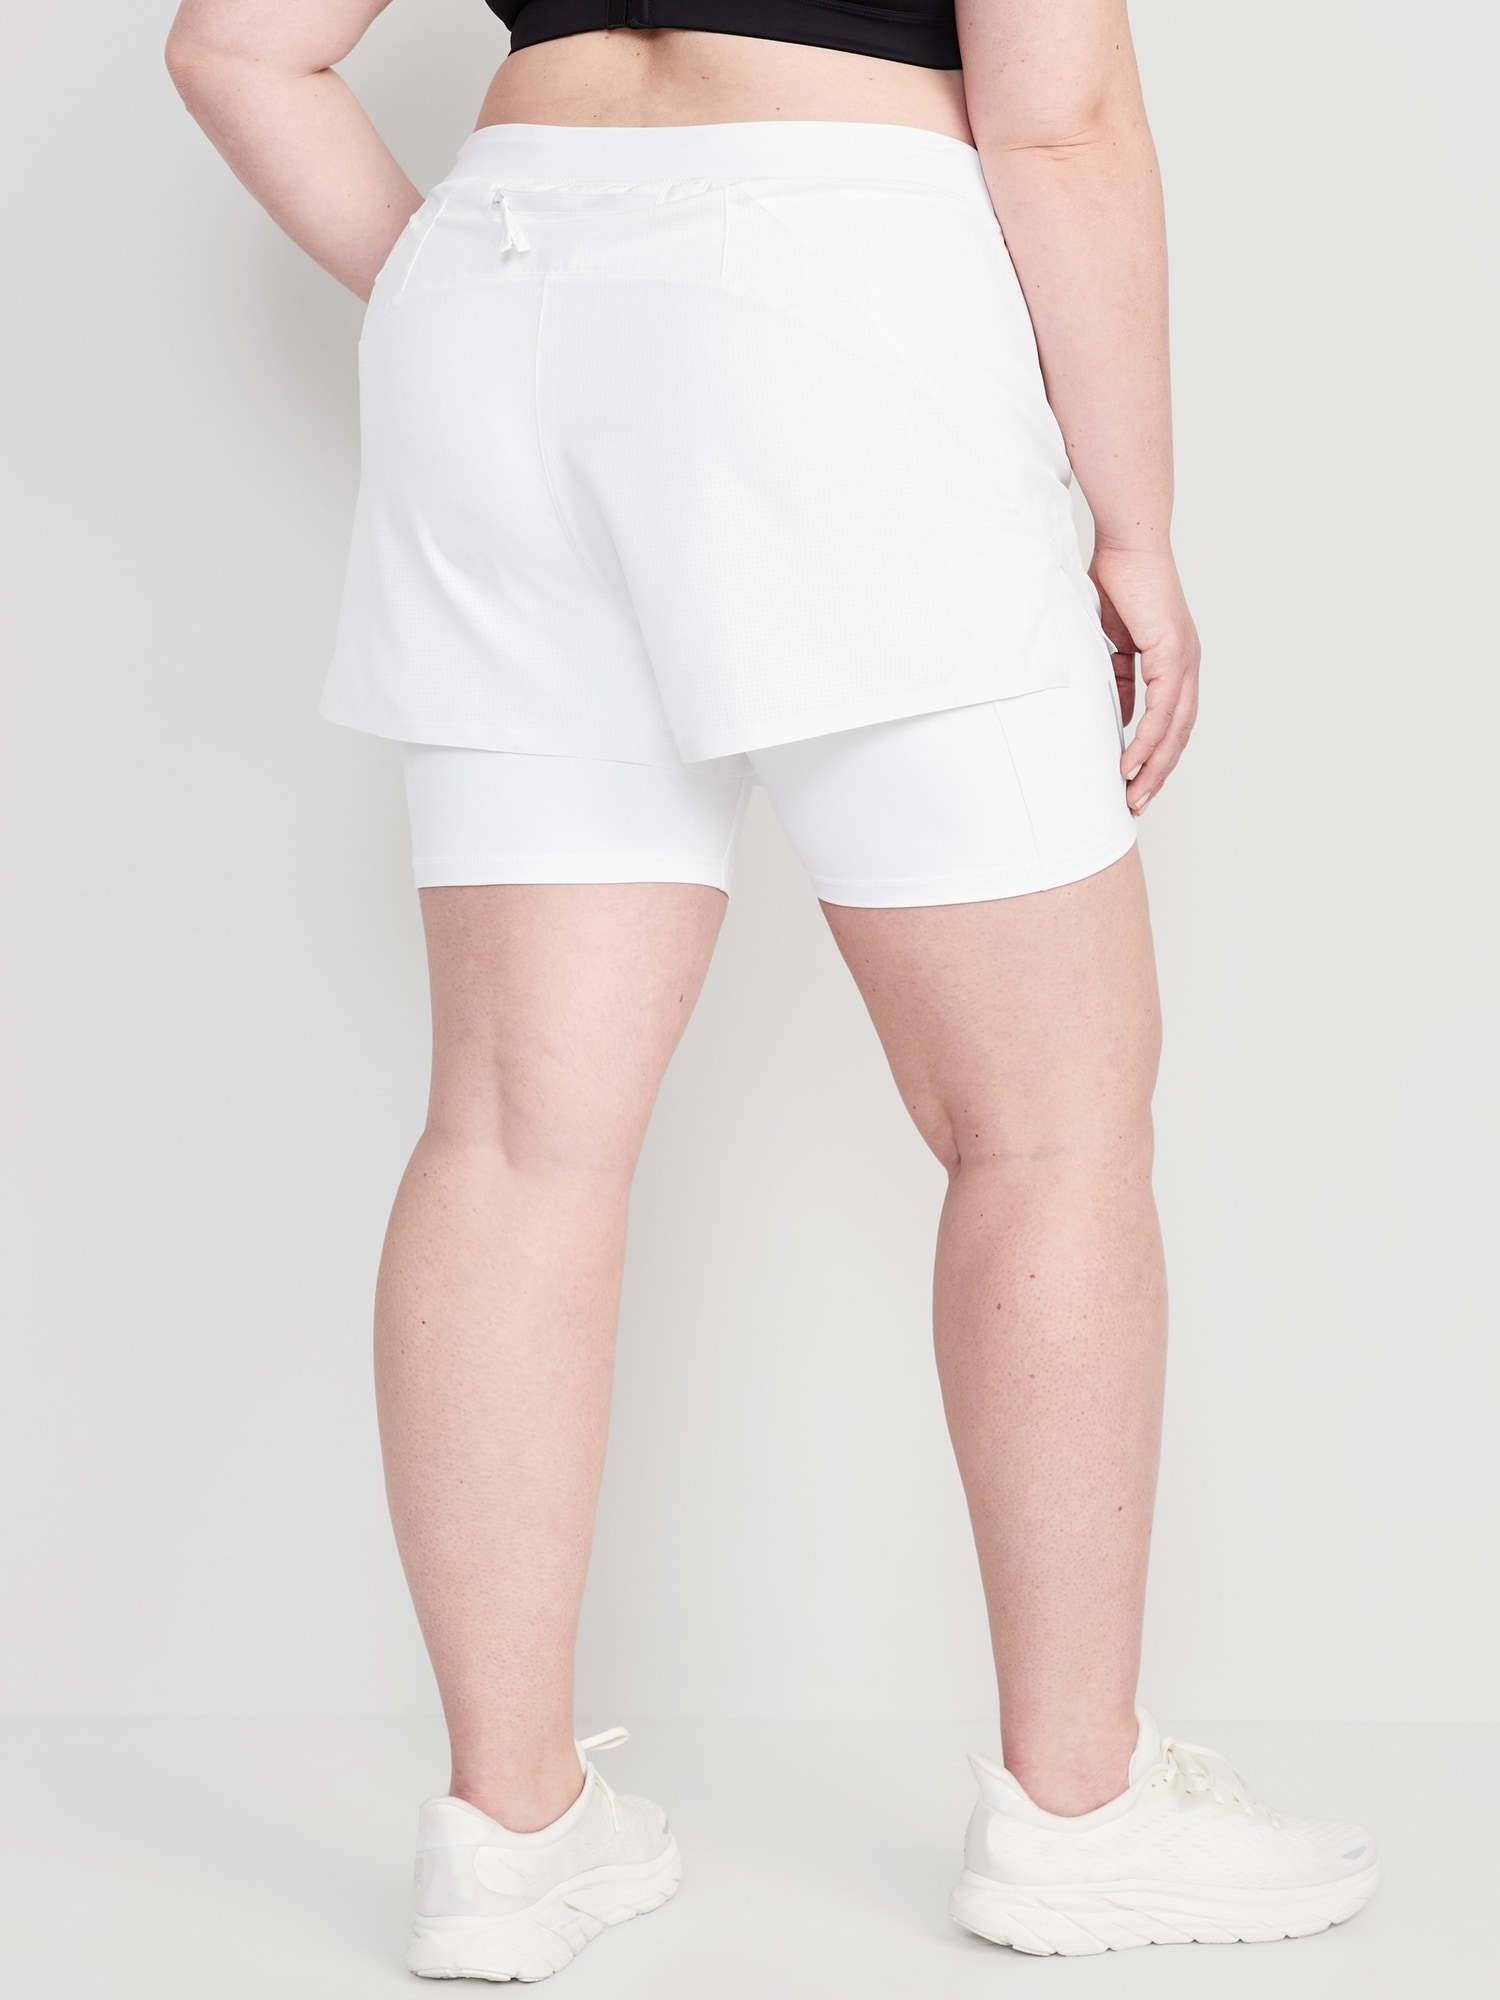 High-Waisted 2-in-1 for 3-inch Shorts StretchTech inseam | Old Women Navy 